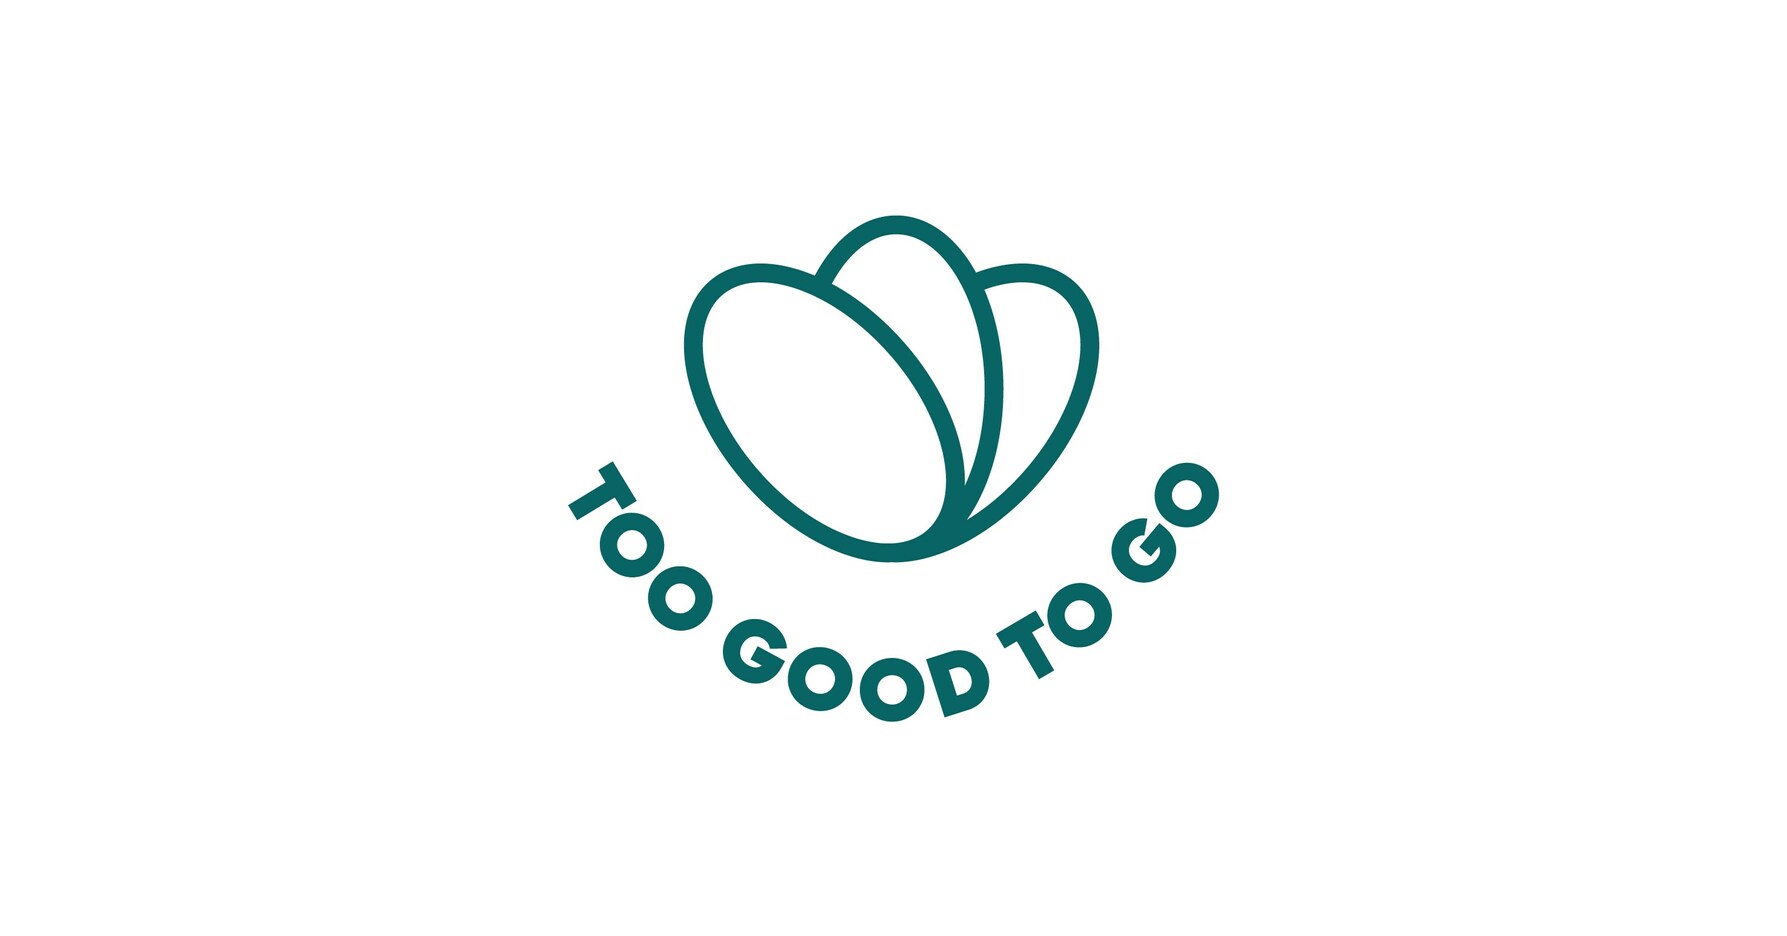 Everything is Bigger in Texas: Too Good To Go Announces Statewide